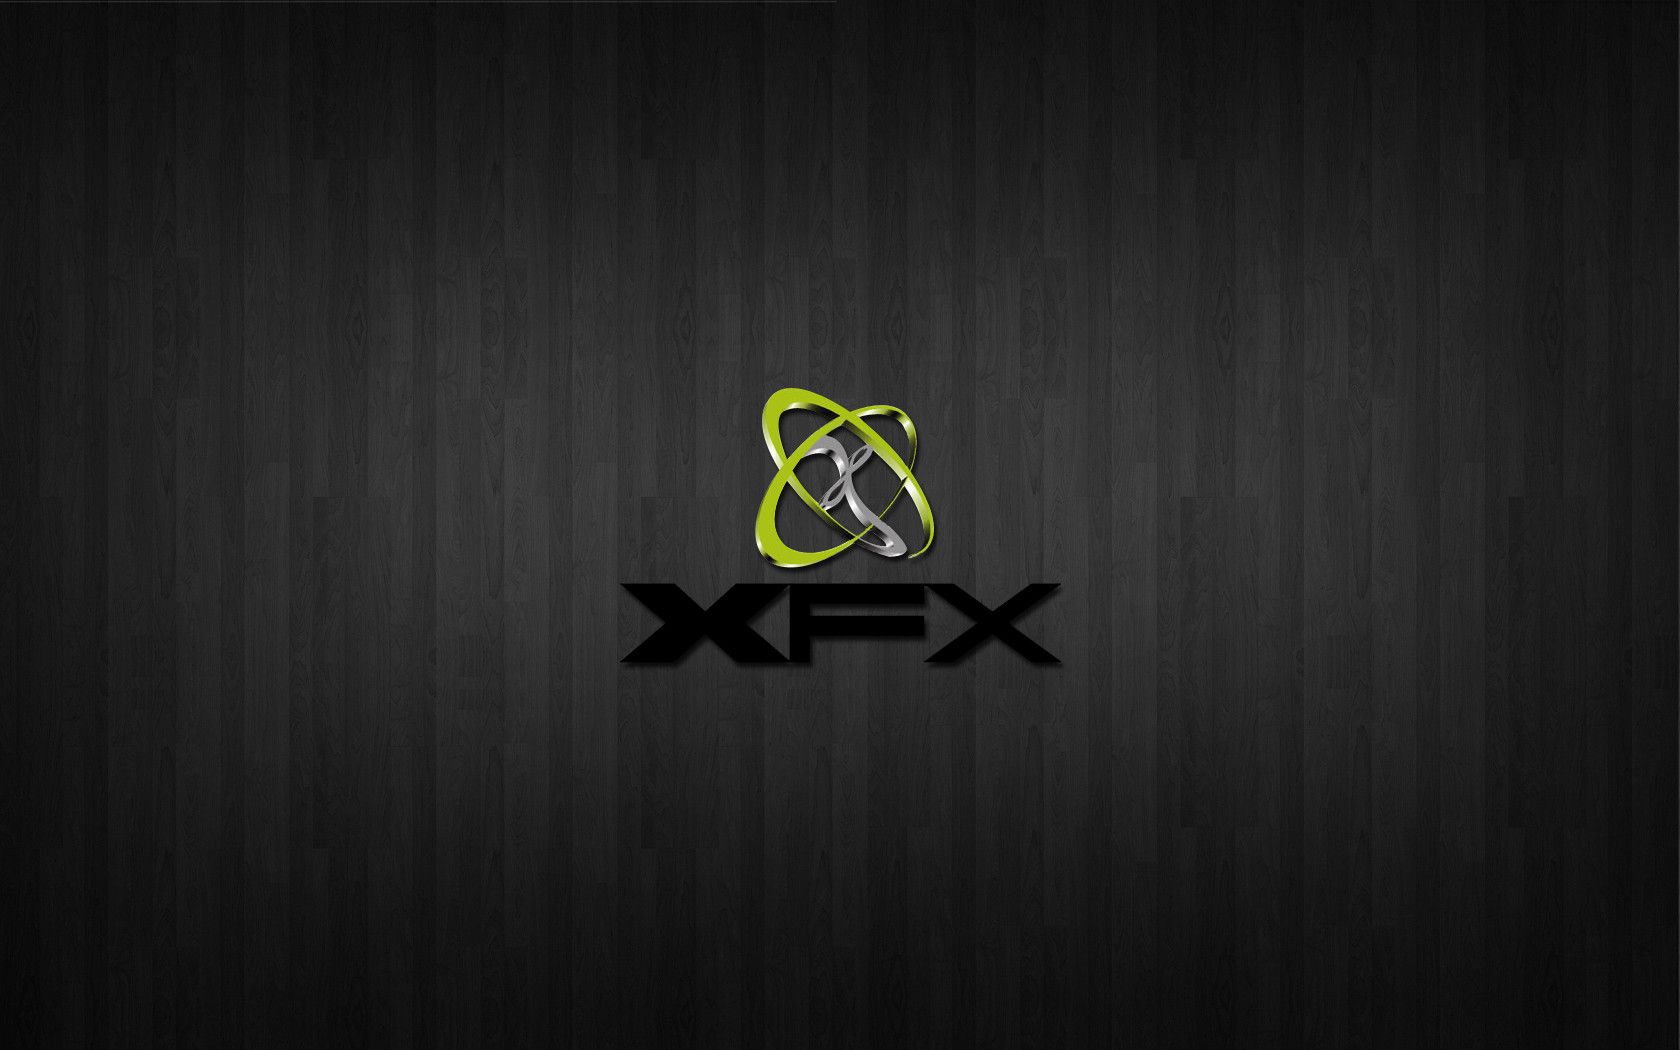 Xfx Wallpapers